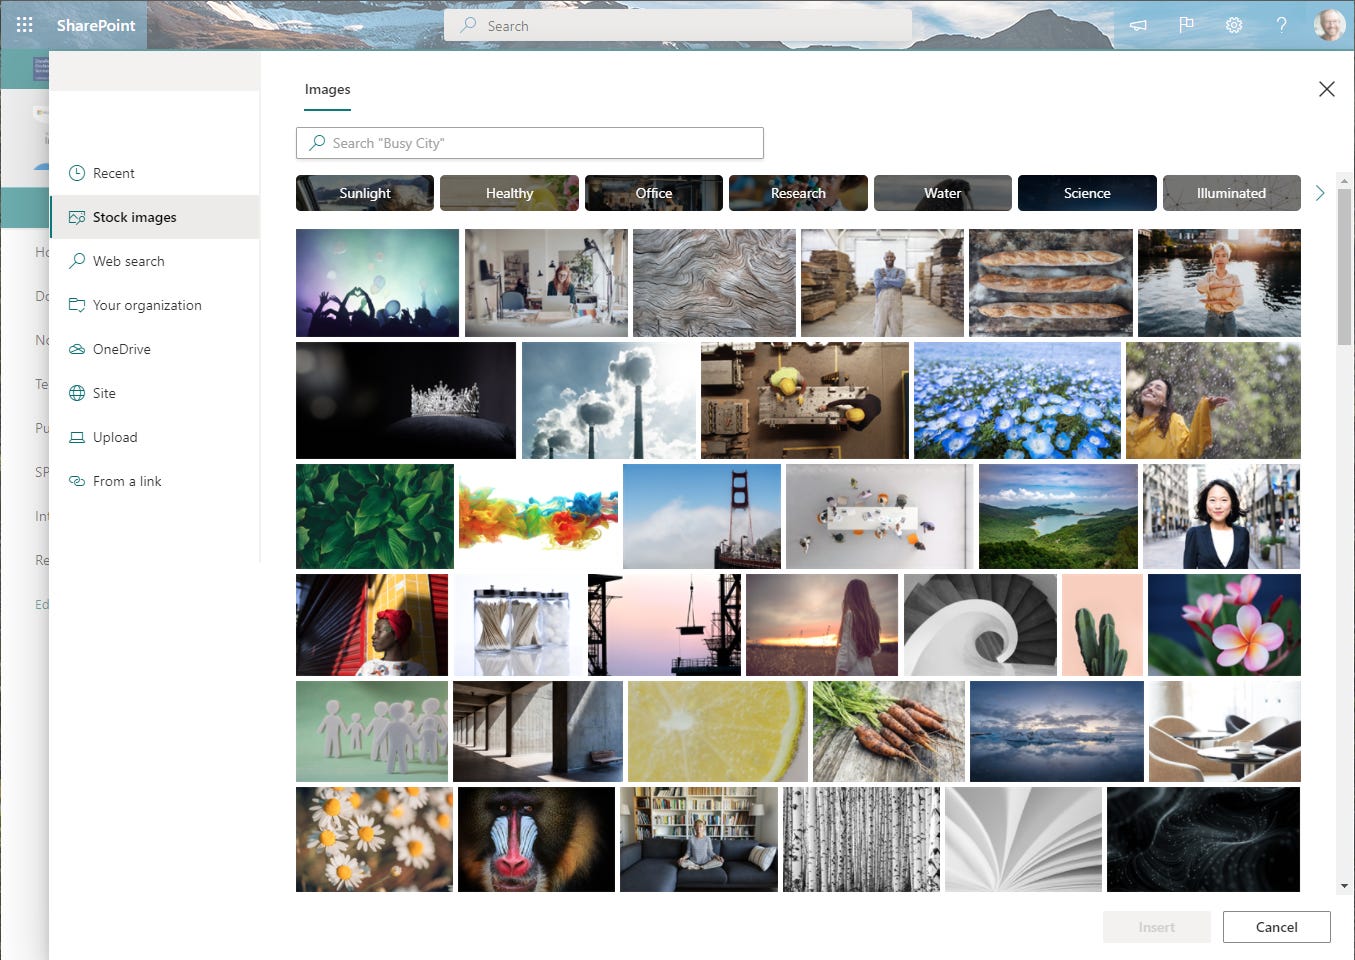 Use Stock images when adding photos to your SharePoint pages or news.